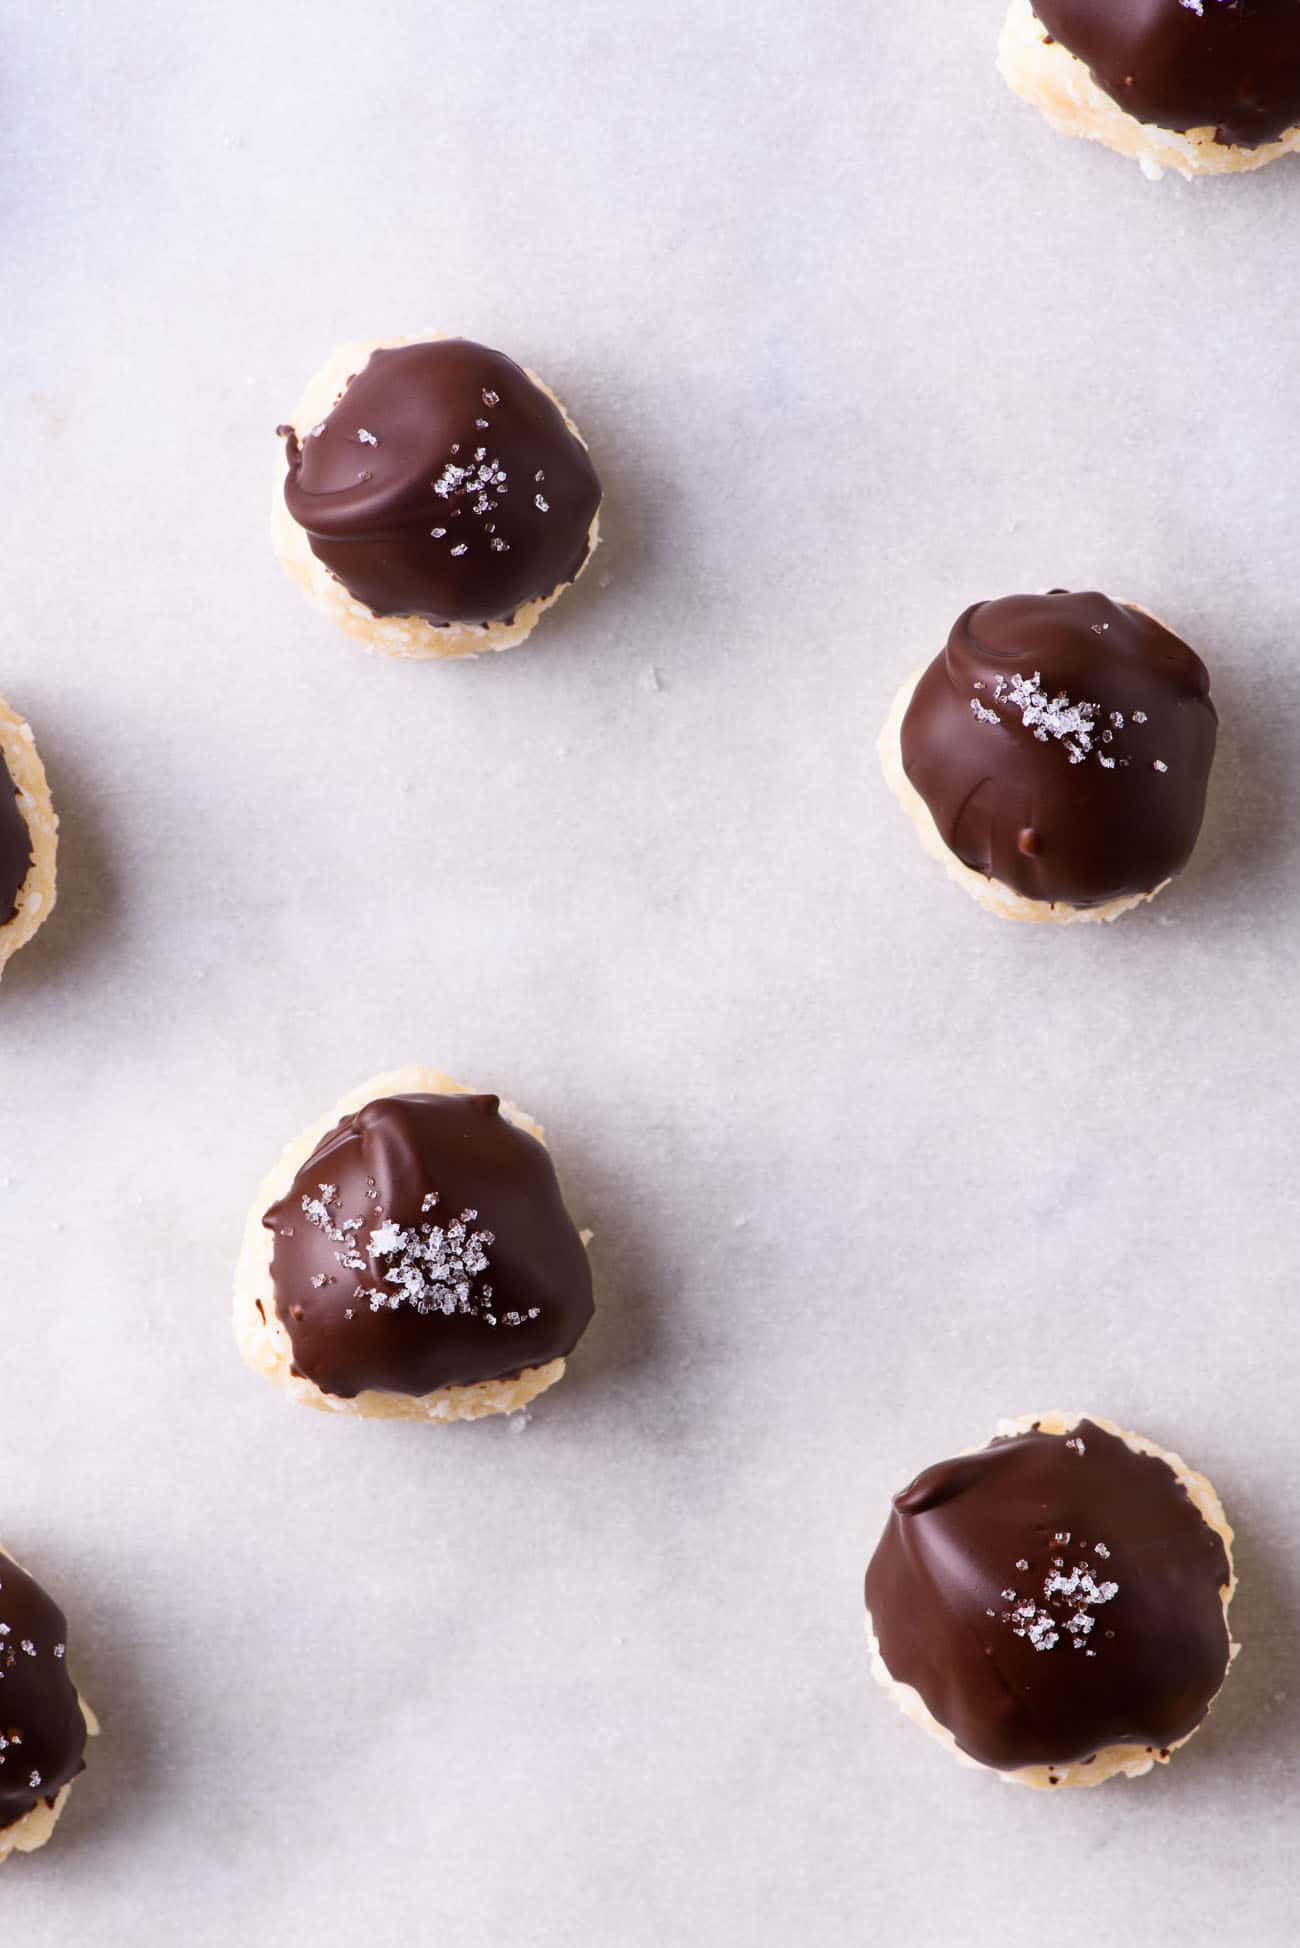 Coconut chocolate balls with sea salt on parchment paper